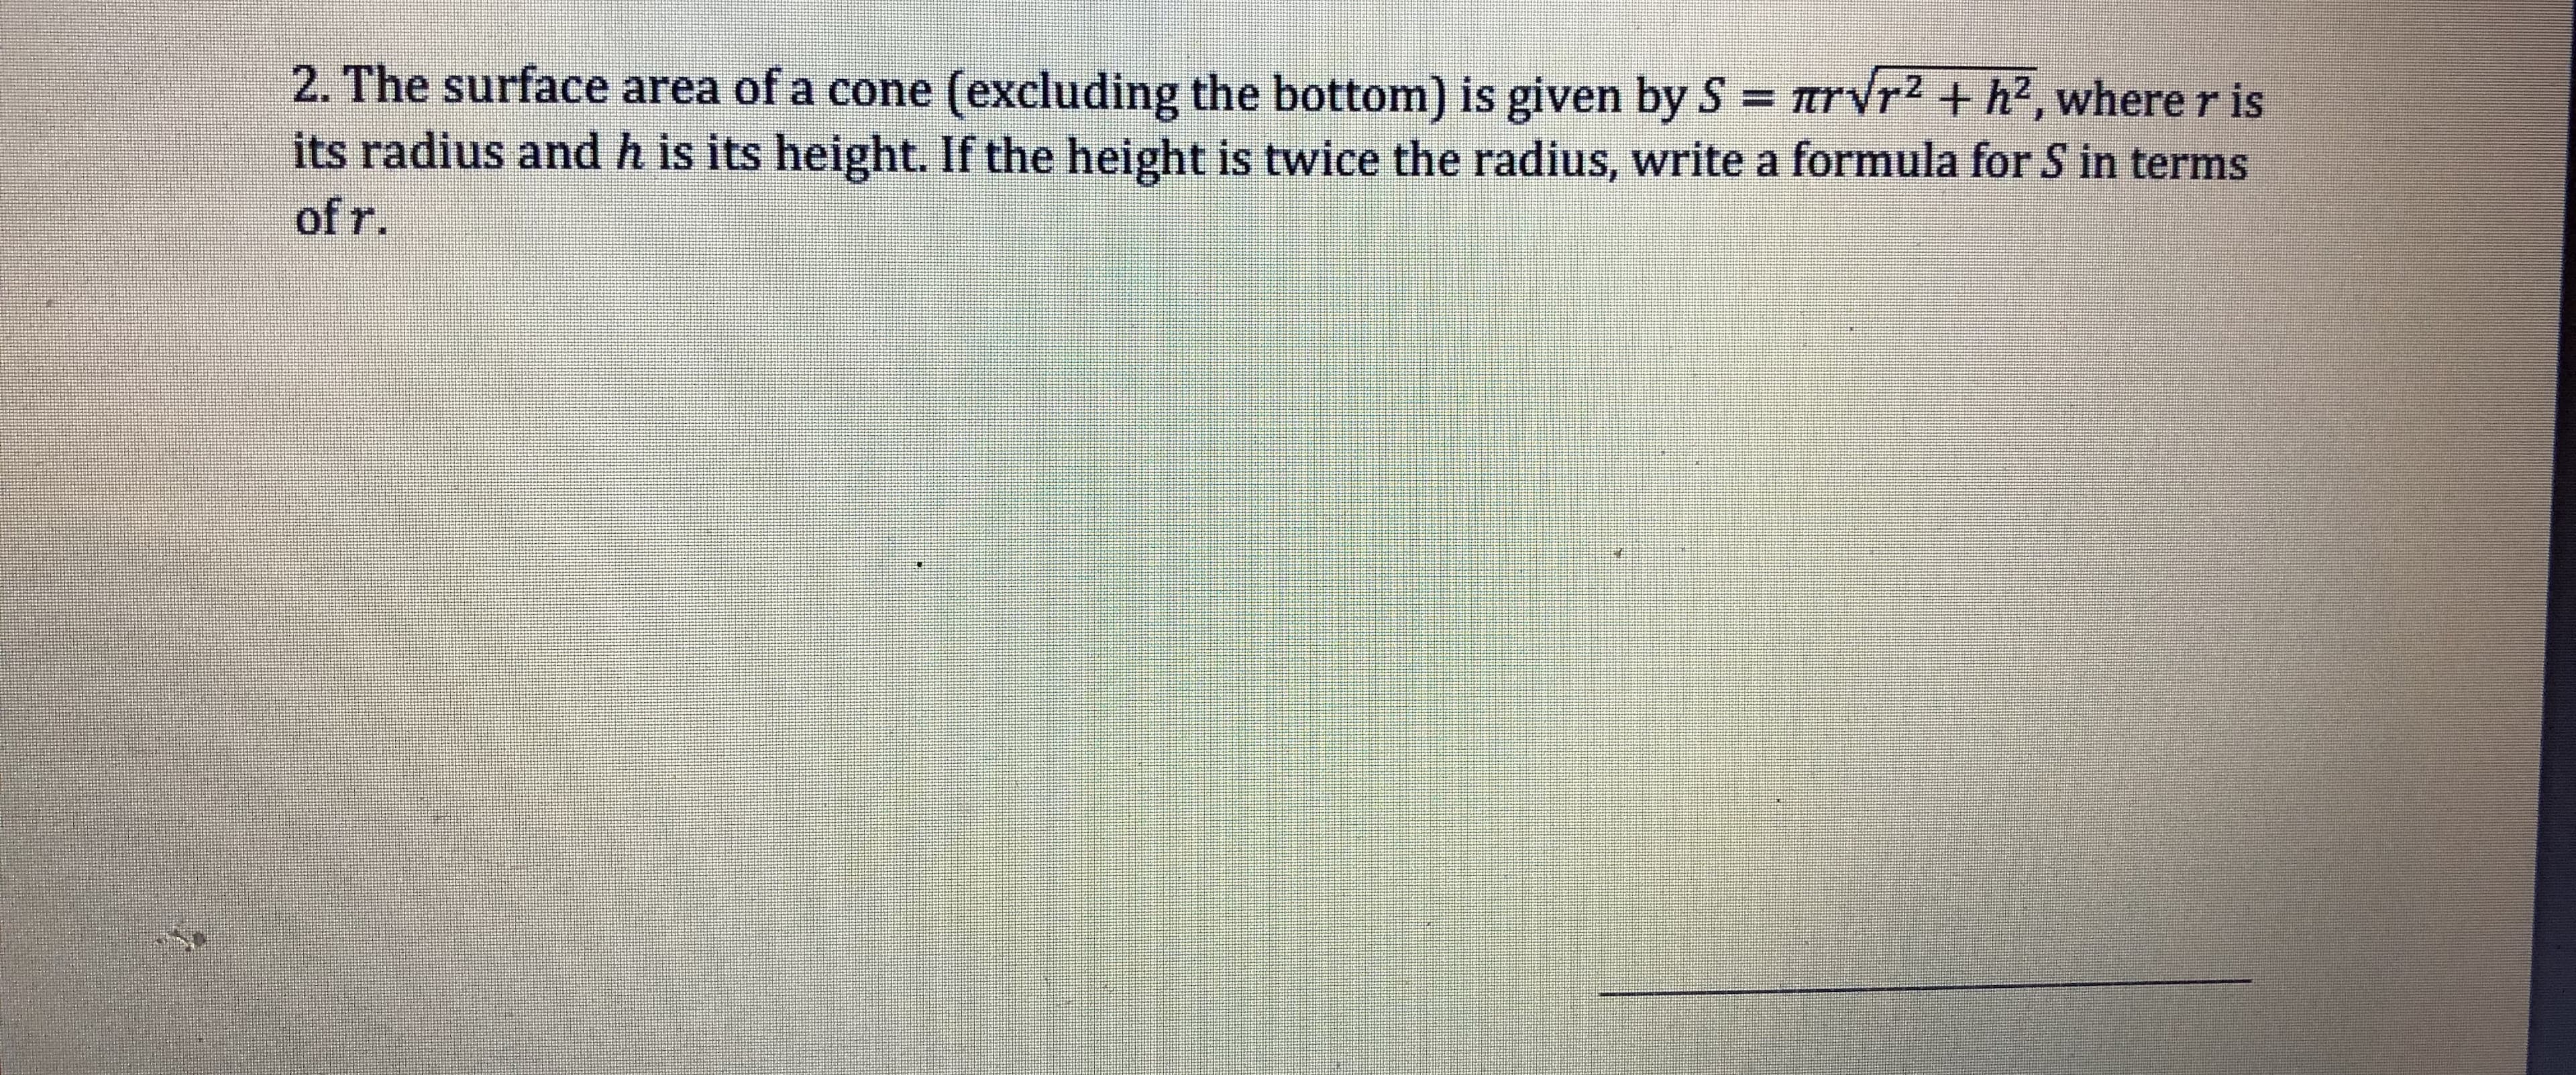 2. The surface area of a cone (excluding the bottom) is given by S rVr2 + h2, where r is
its radius and h is its height. If the height is twice the radius, write a formula for S in terms
of r
